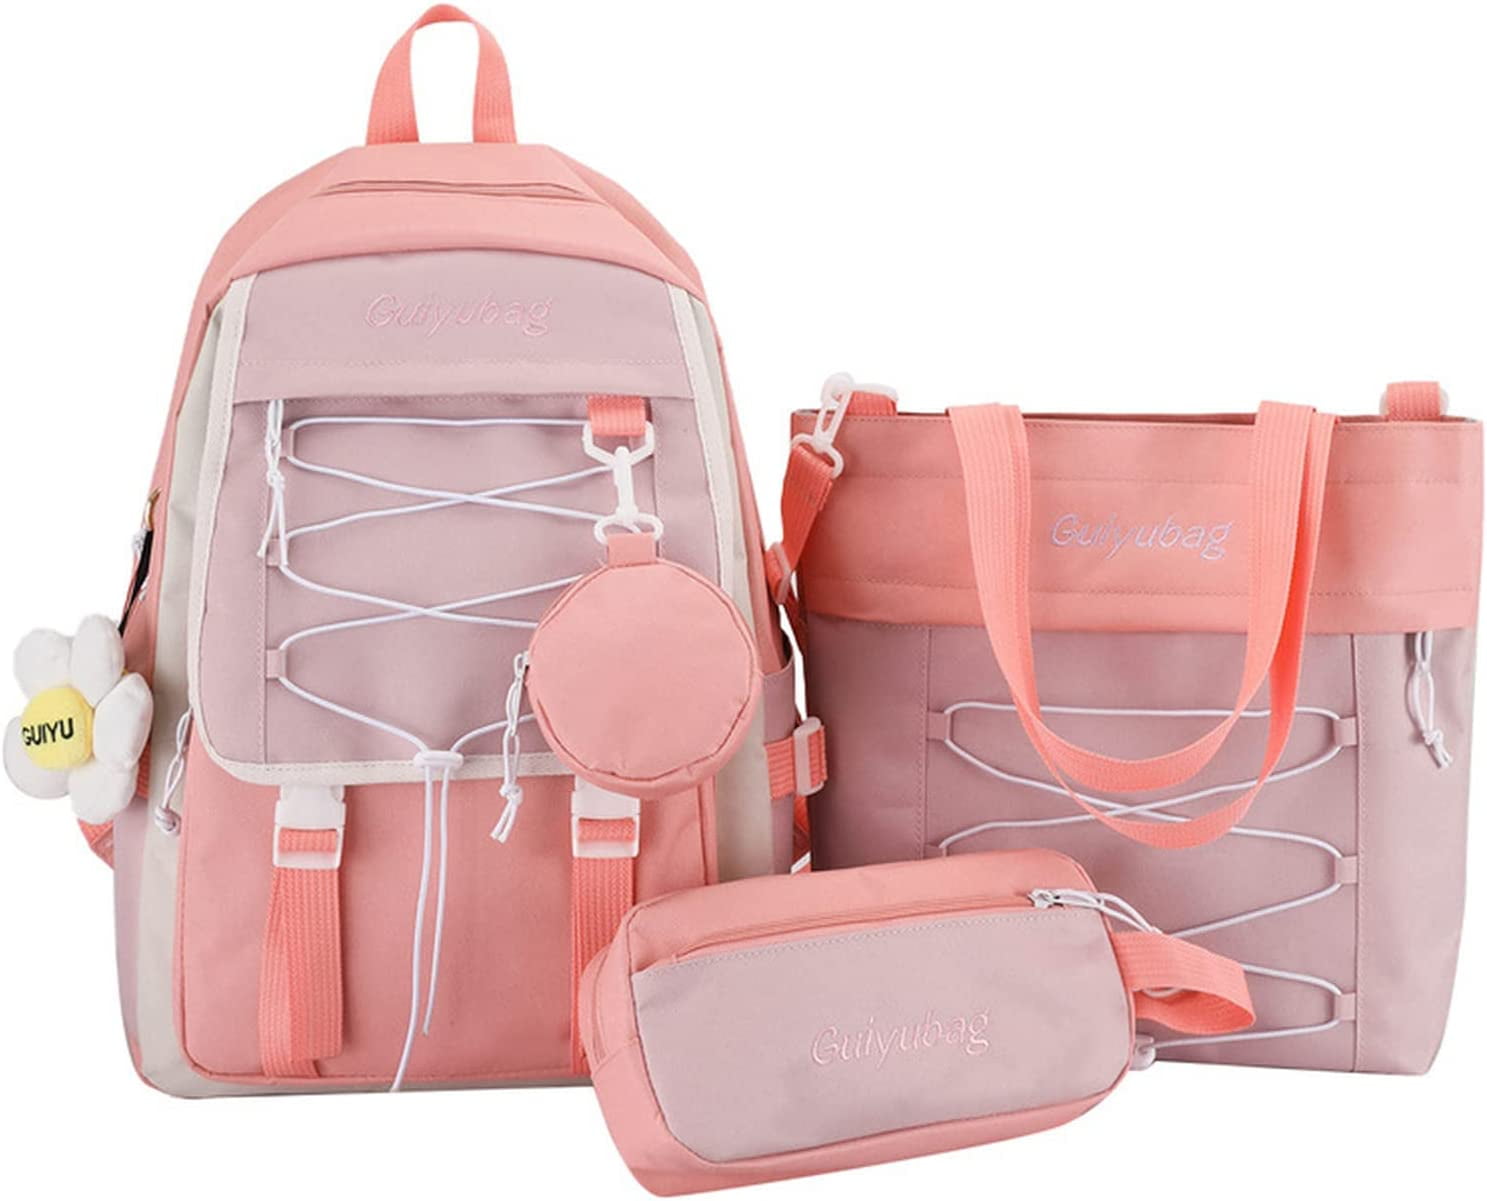 Back to School Supplies Kit - Pink